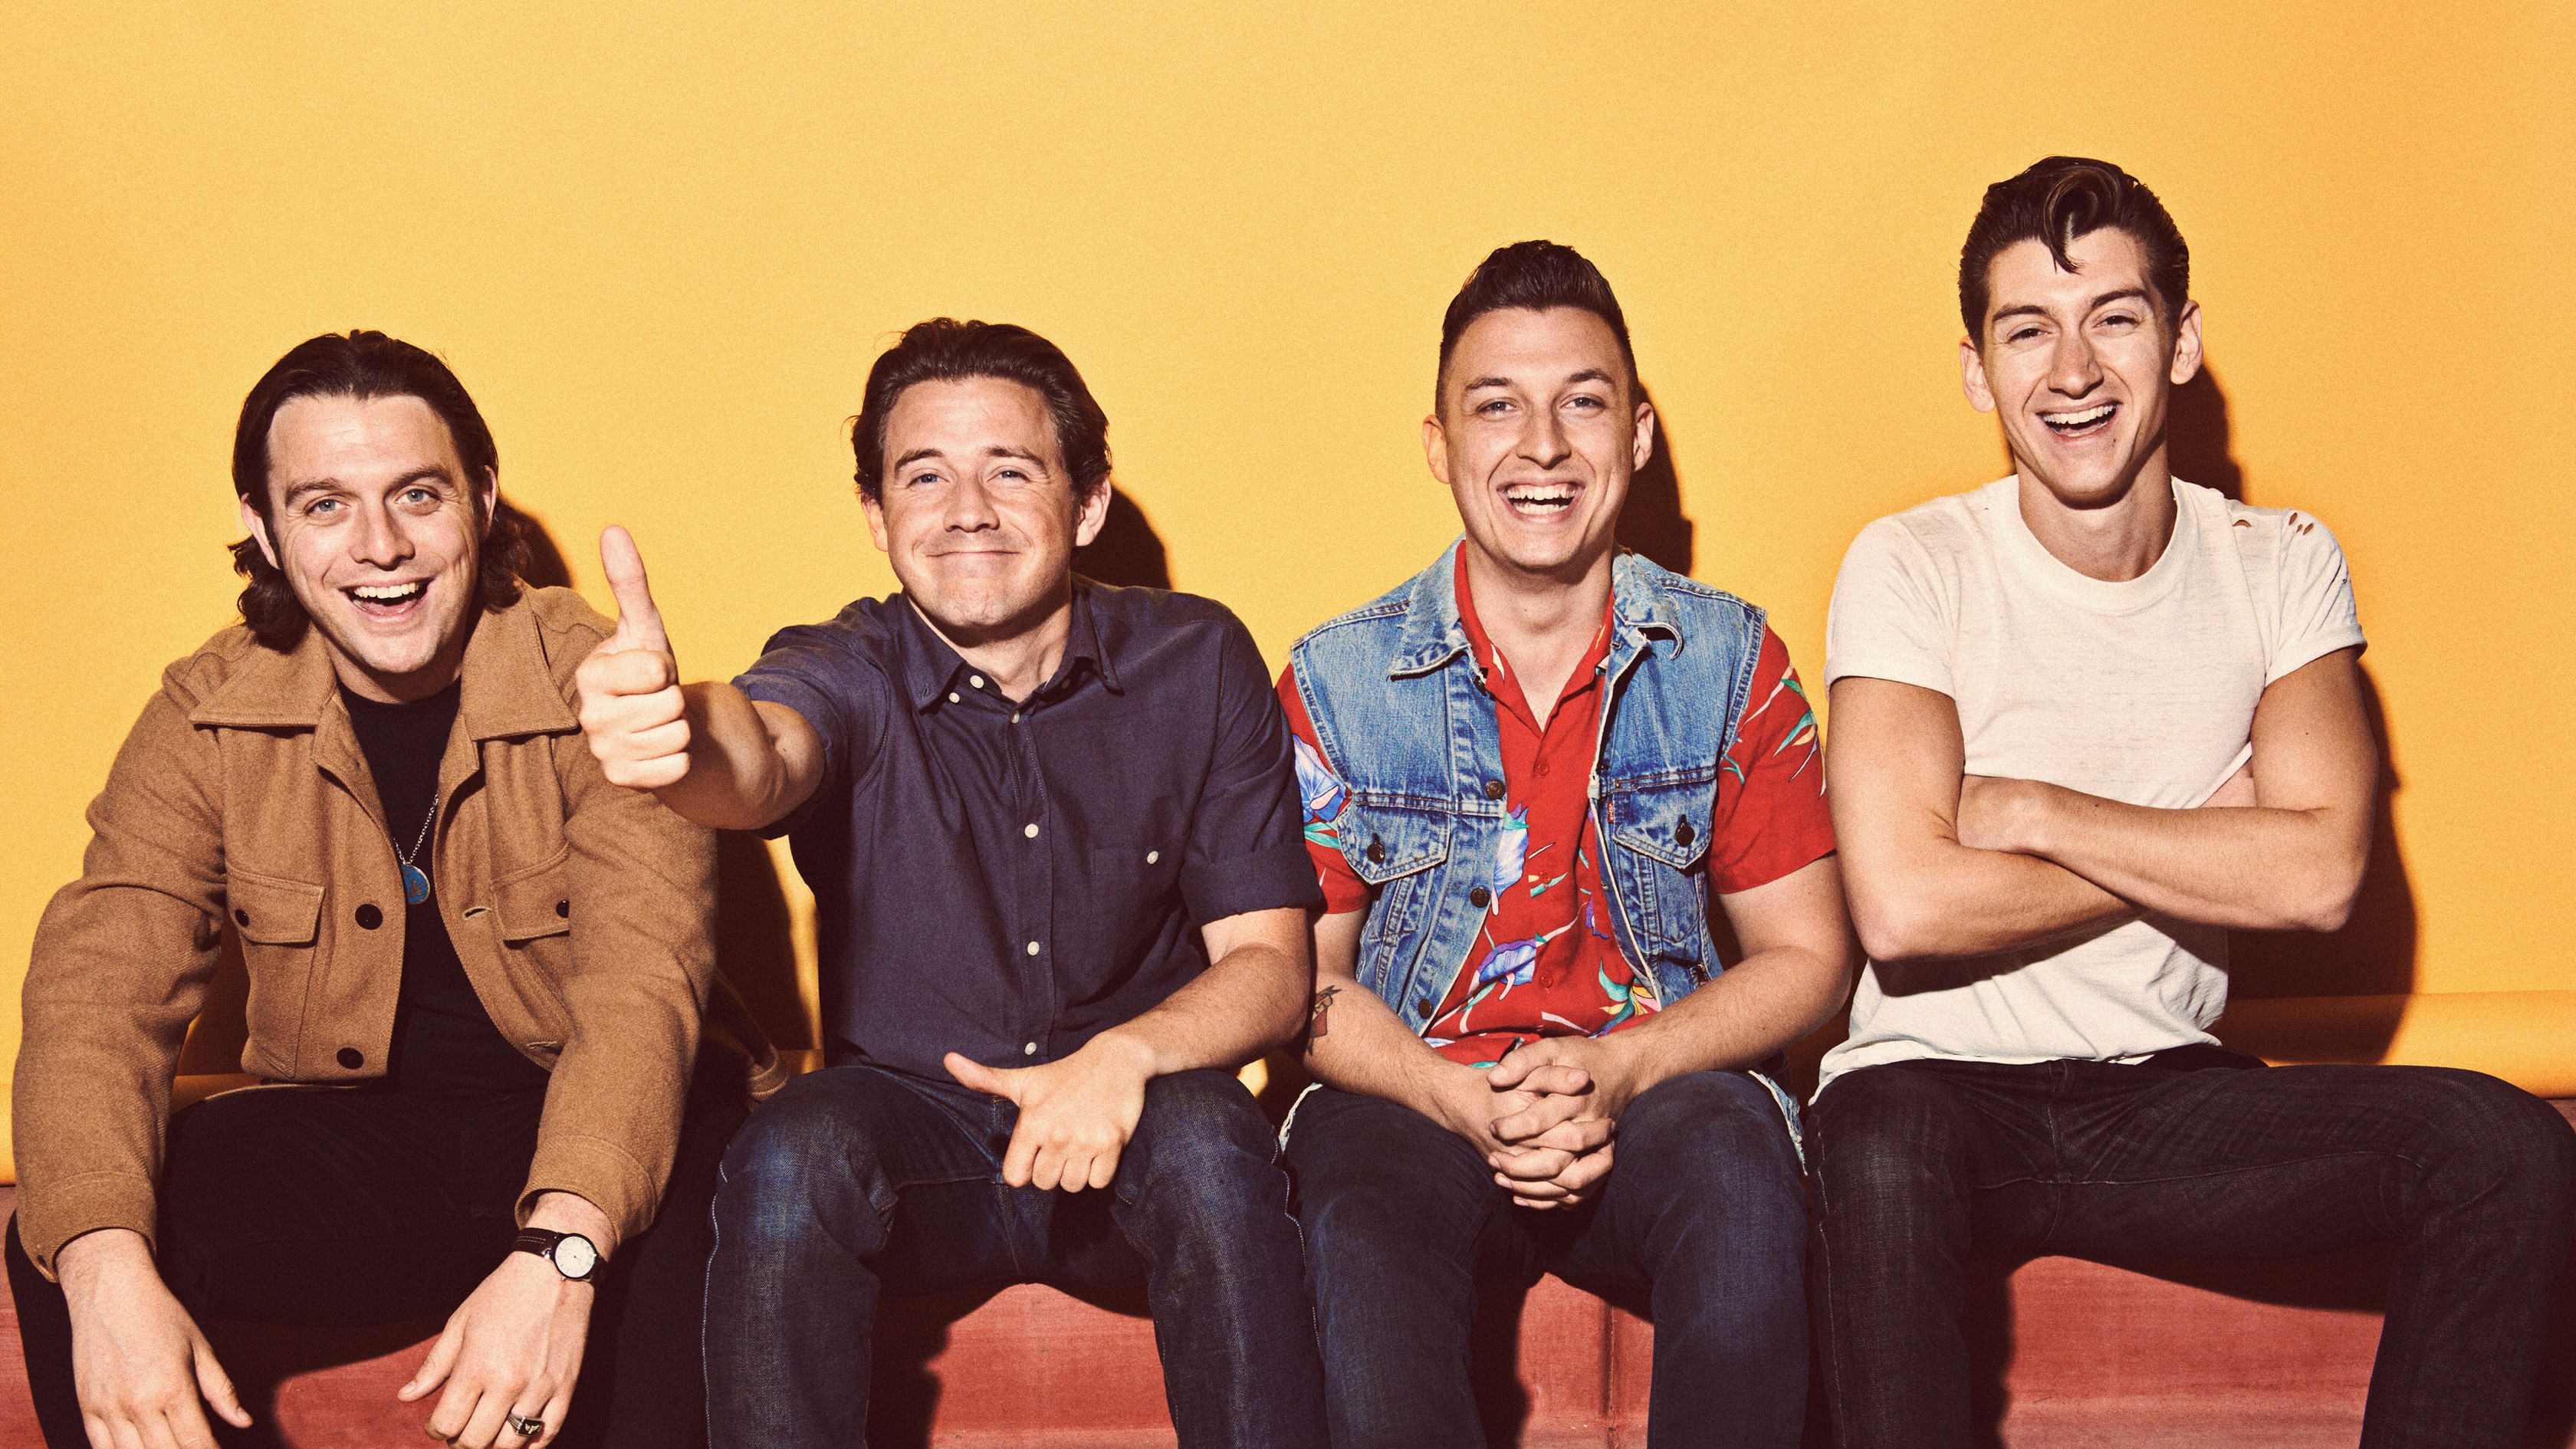 People 3360x1890 Arctic Monkeys men smiling music sitting group of men yellow background men indoors hand gesture band simple background